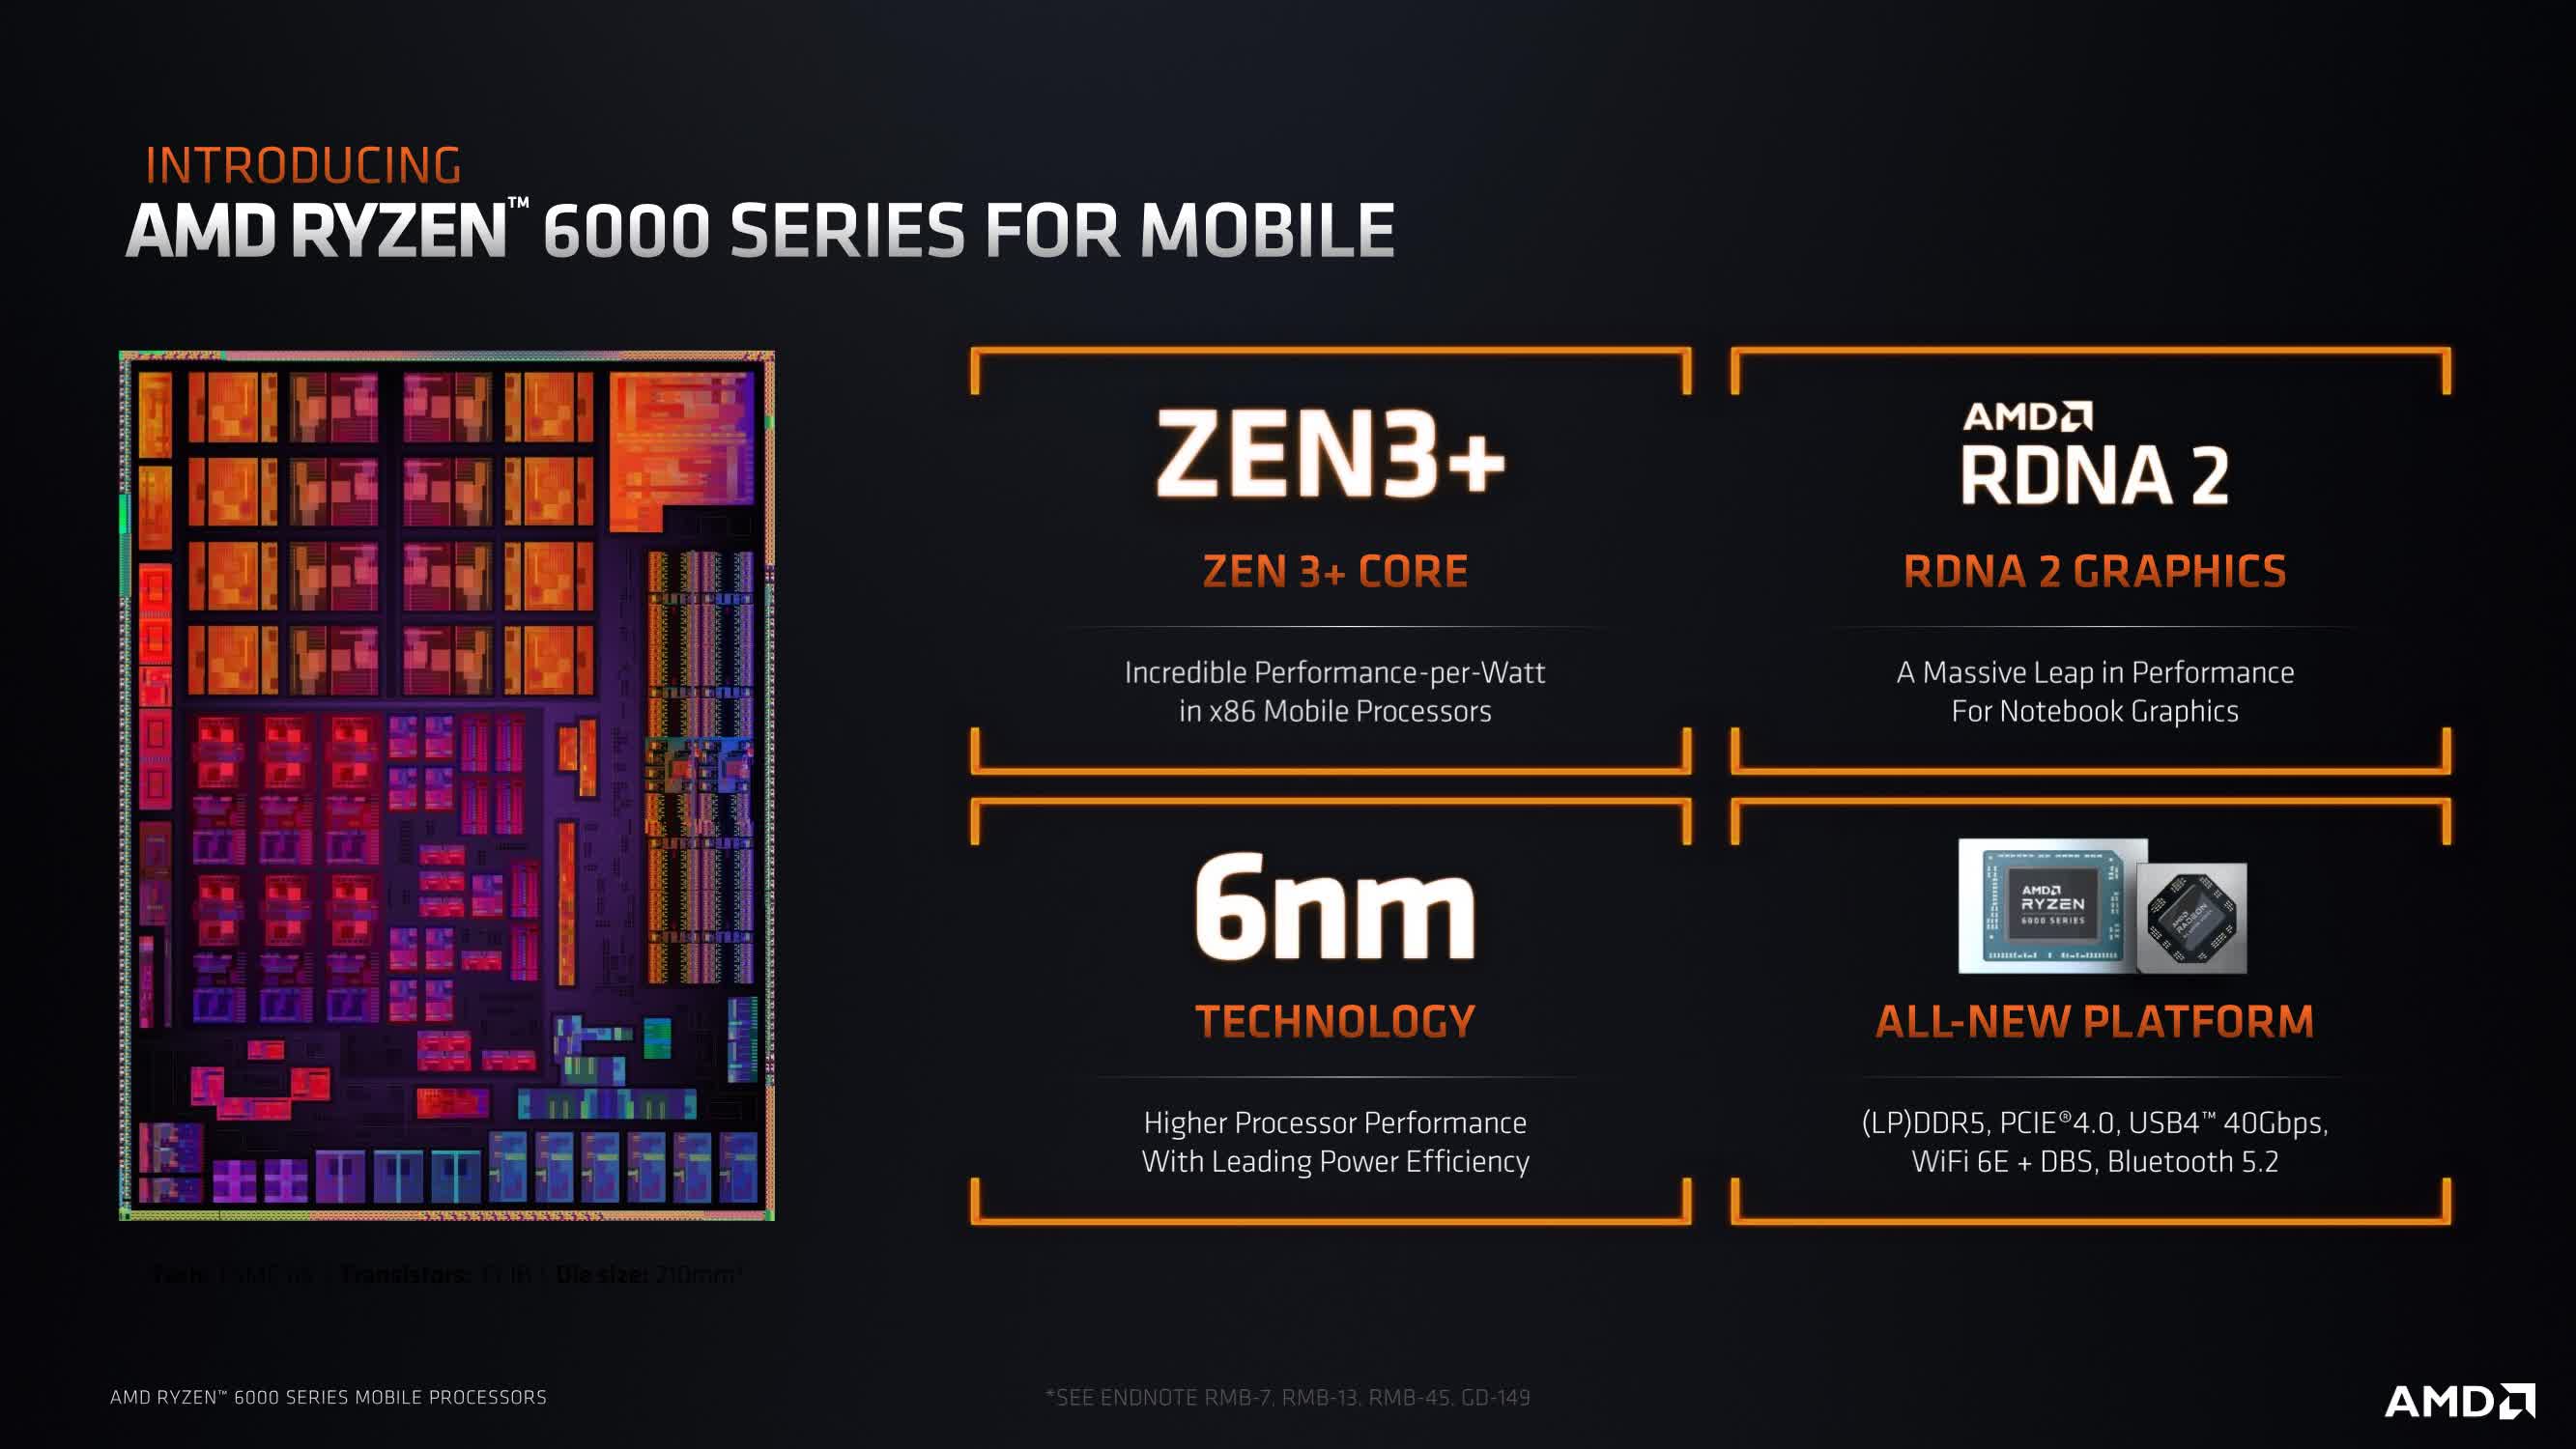 AMD launches Ryzen 6000 series for laptops: What's new with the Zen 3+ architecture?